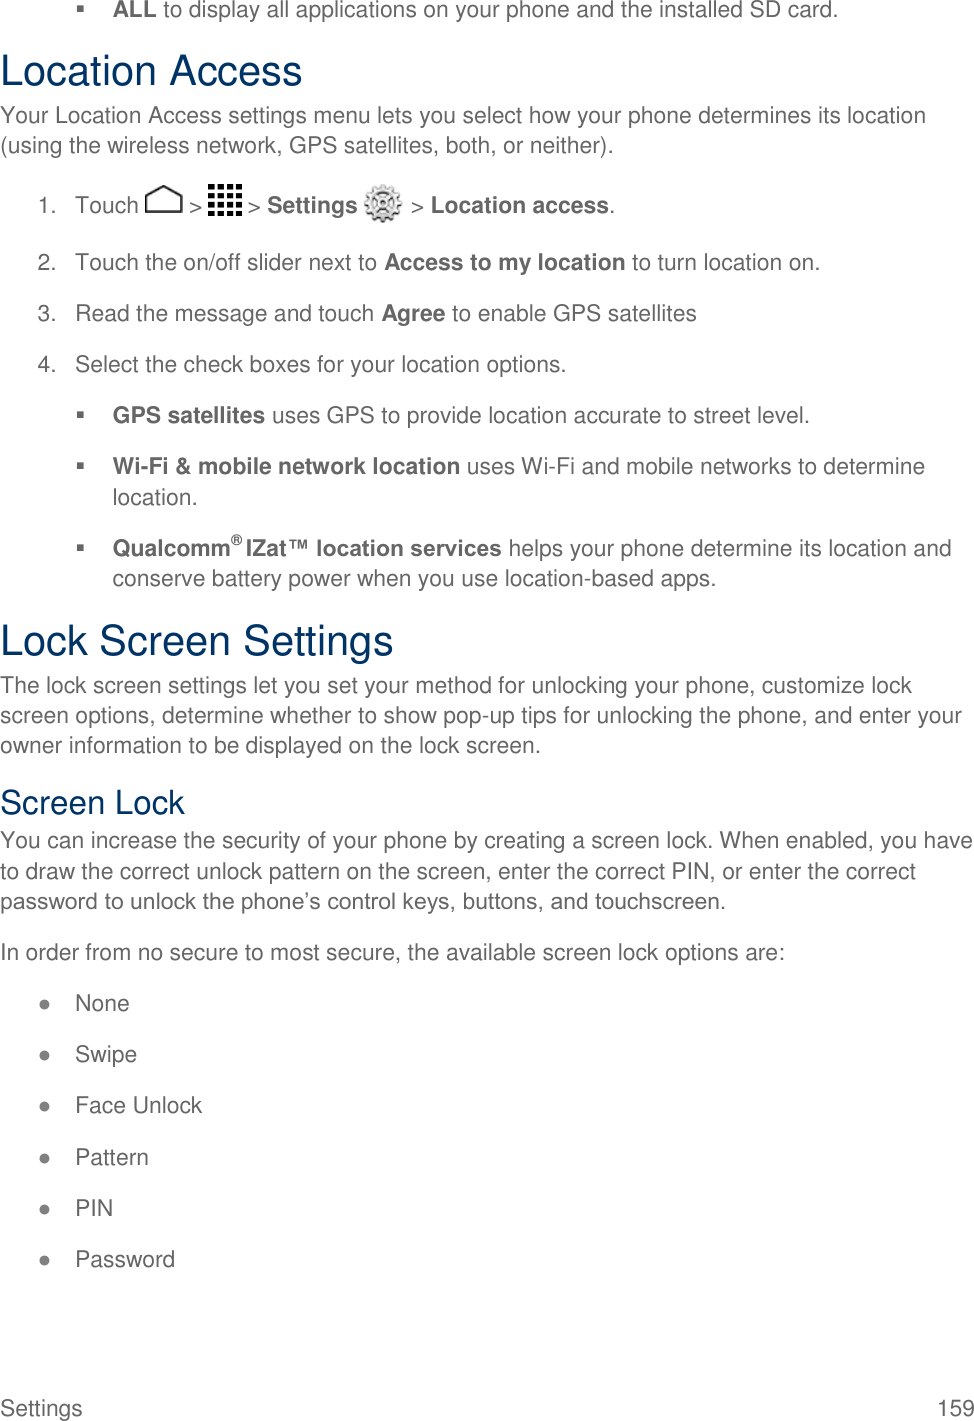 Settings  159  ALL to display all applications on your phone and the installed SD card. Location Access Your Location Access settings menu lets you select how your phone determines its location (using the wireless network, GPS satellites, both, or neither).  1.  Touch   &gt;   &gt; Settings   &gt; Location access. 2.  Touch the on/off slider next to Access to my location to turn location on. 3.  Read the message and touch Agree to enable GPS satellites 4.  Select the check boxes for your location options.  GPS satellites uses GPS to provide location accurate to street level.  Wi-Fi &amp; mobile network location uses Wi-Fi and mobile networks to determine location.  Qualcomm® IZat™ location services helps your phone determine its location and conserve battery power when you use location-based apps. Lock Screen Settings The lock screen settings let you set your method for unlocking your phone, customize lock screen options, determine whether to show pop-up tips for unlocking the phone, and enter your owner information to be displayed on the lock screen. Screen Lock You can increase the security of your phone by creating a screen lock. When enabled, you have to draw the correct unlock pattern on the screen, enter the correct PIN, or enter the correct password to unlock the phone’s control keys, buttons, and touchscreen. In order from no secure to most secure, the available screen lock options are: ● None ● Swipe ● Face Unlock ● Pattern ● PIN ● Password 